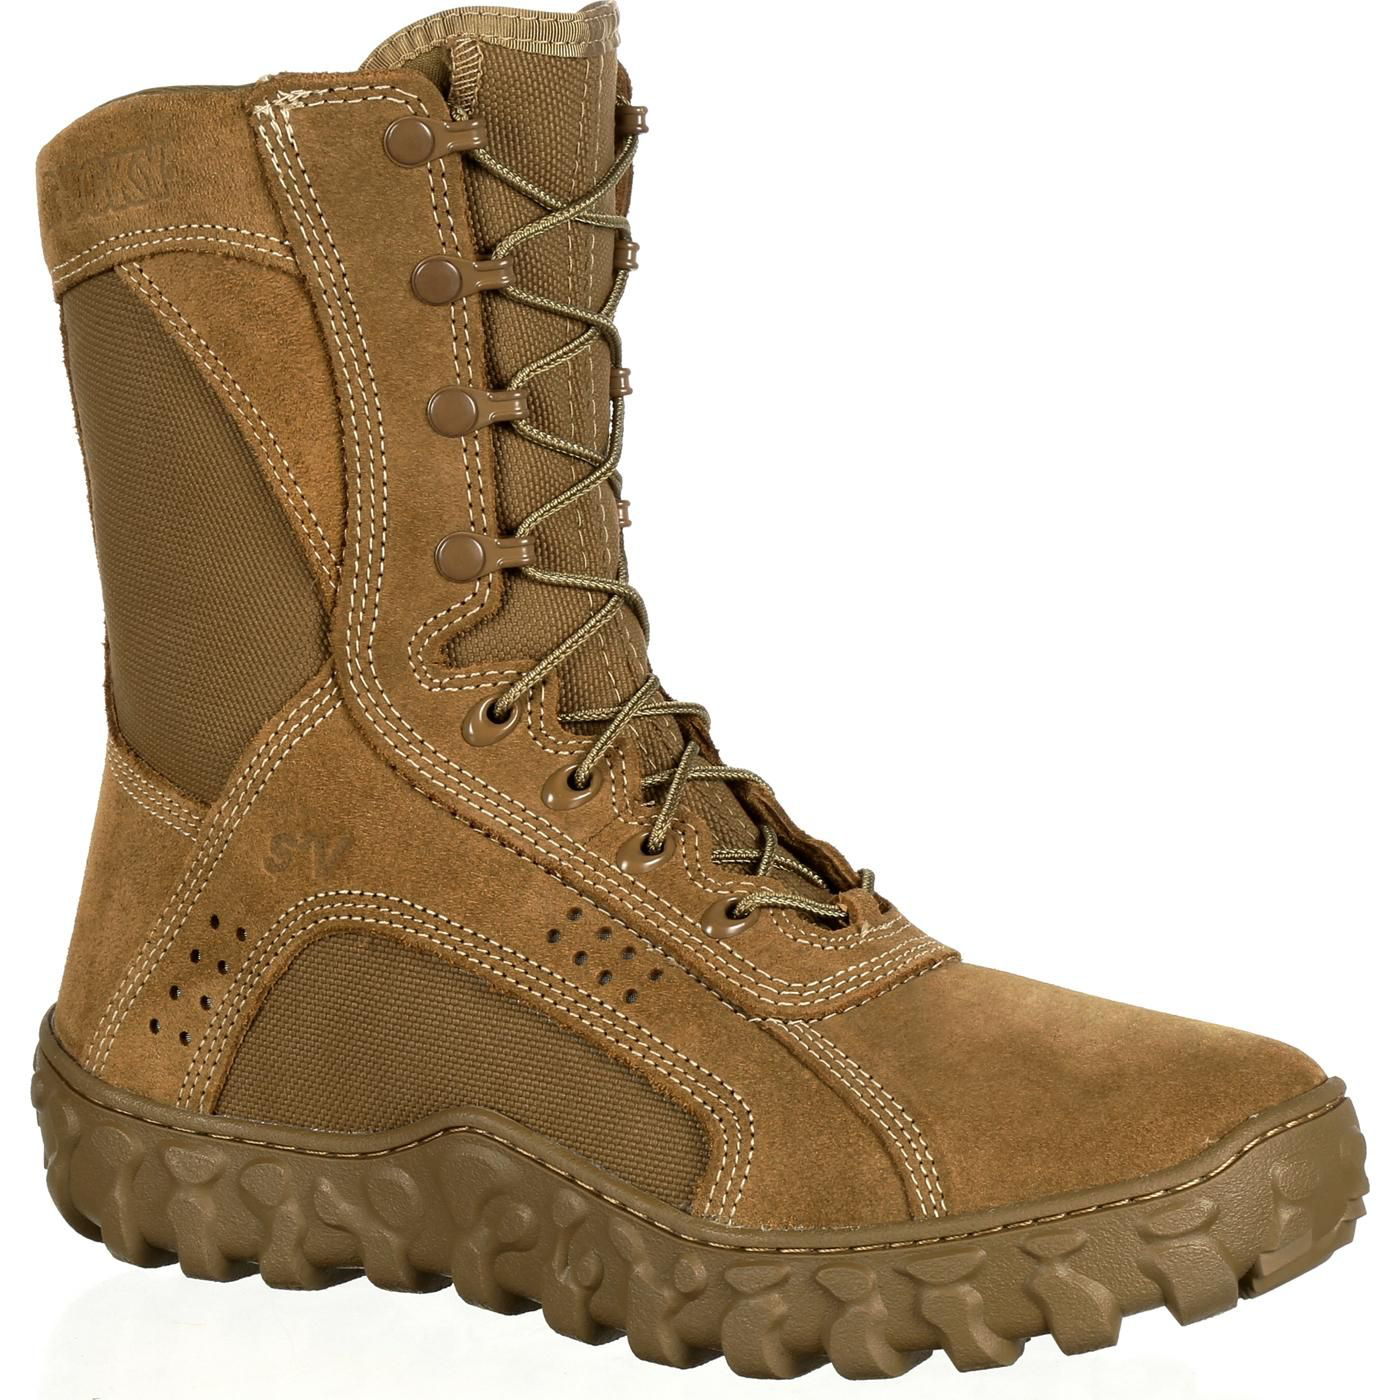 Rocky S2V Tactical Military Boots for Men - Coyote Brown - 13W